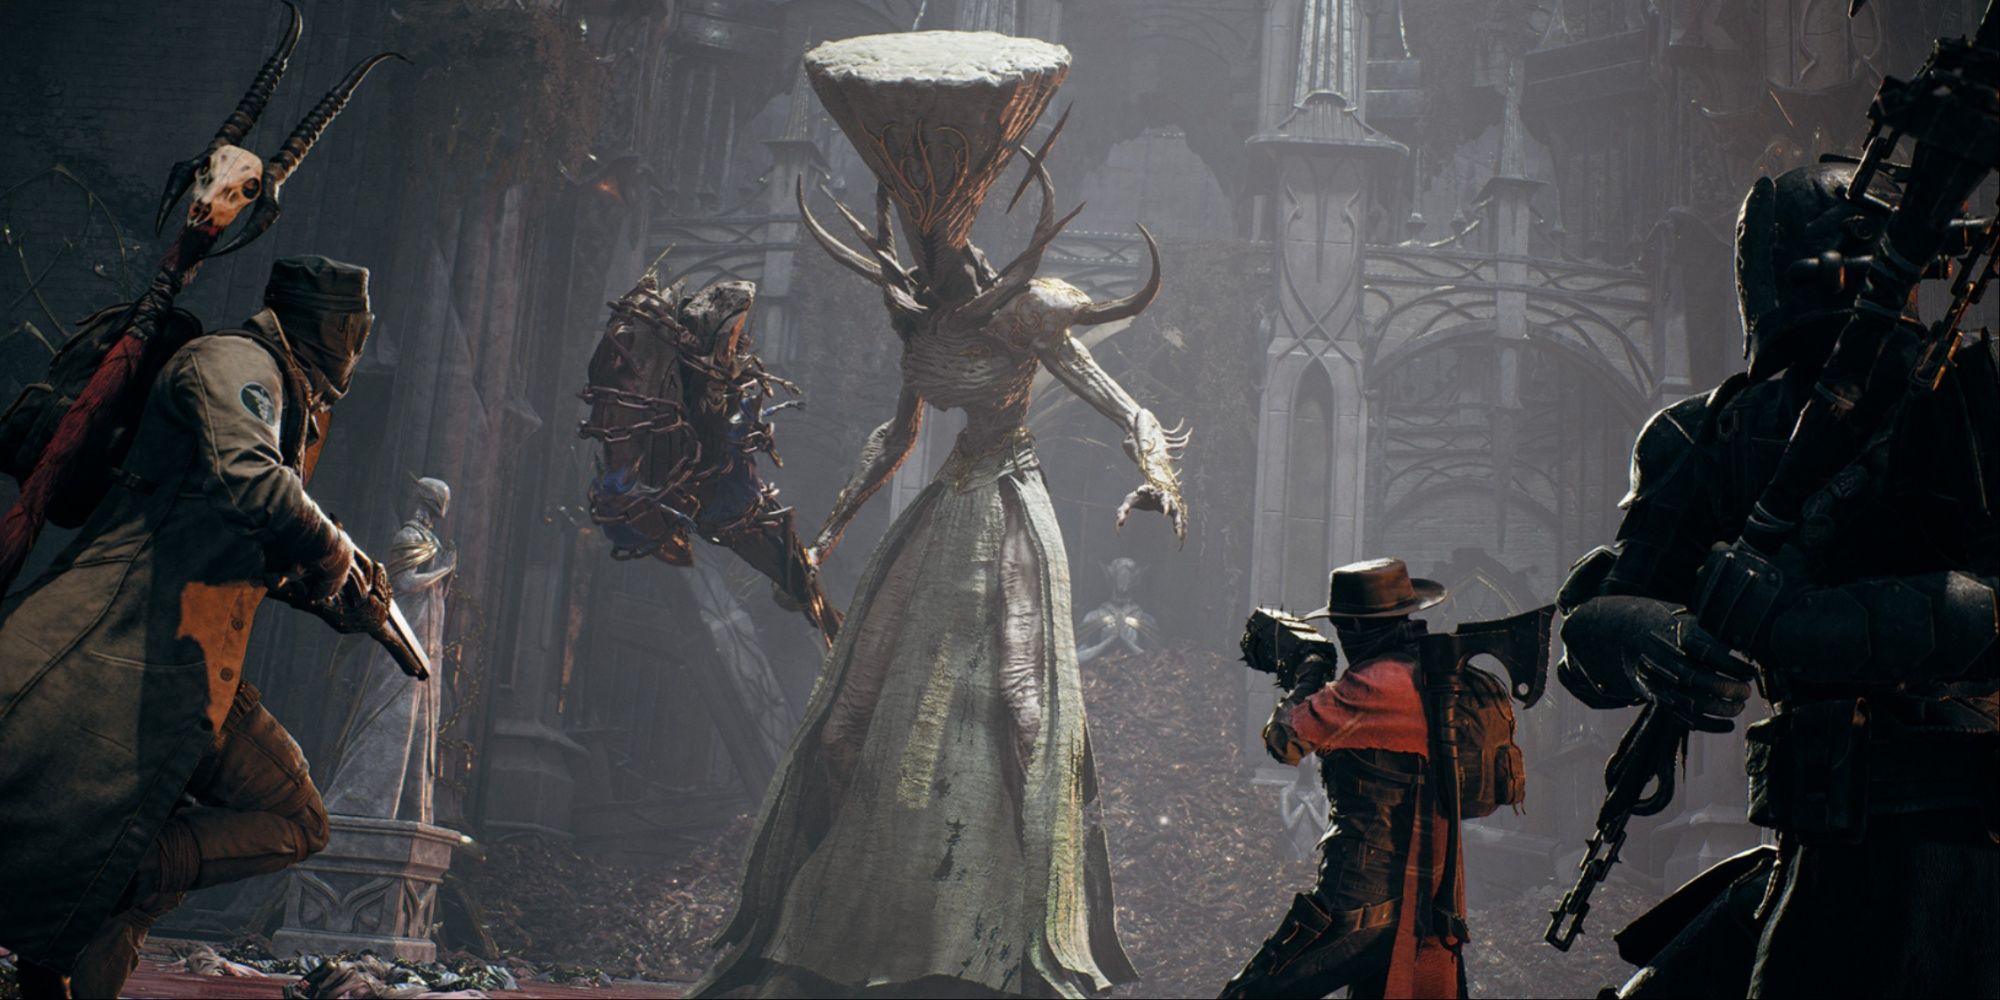 A trio of players facing the towering club-wielding and disturbing One True King boss, weapons pointed at him in the Gothic chamber room.